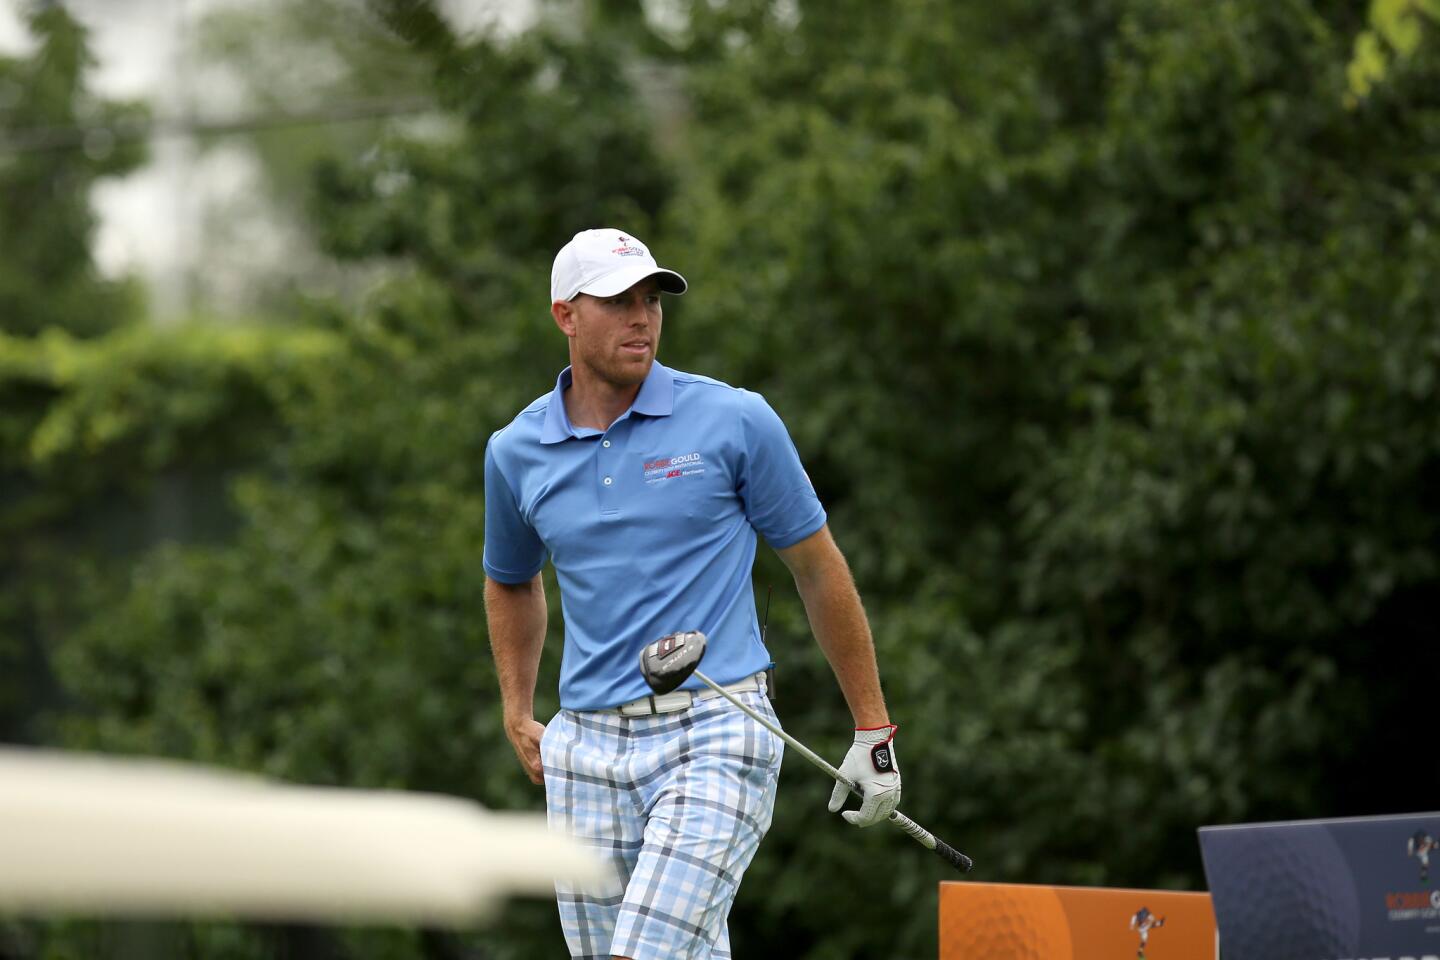 Former Bears kicker Robbie Gould walks off the course during a golf event at Medinah Country Club on July 18, 2016.